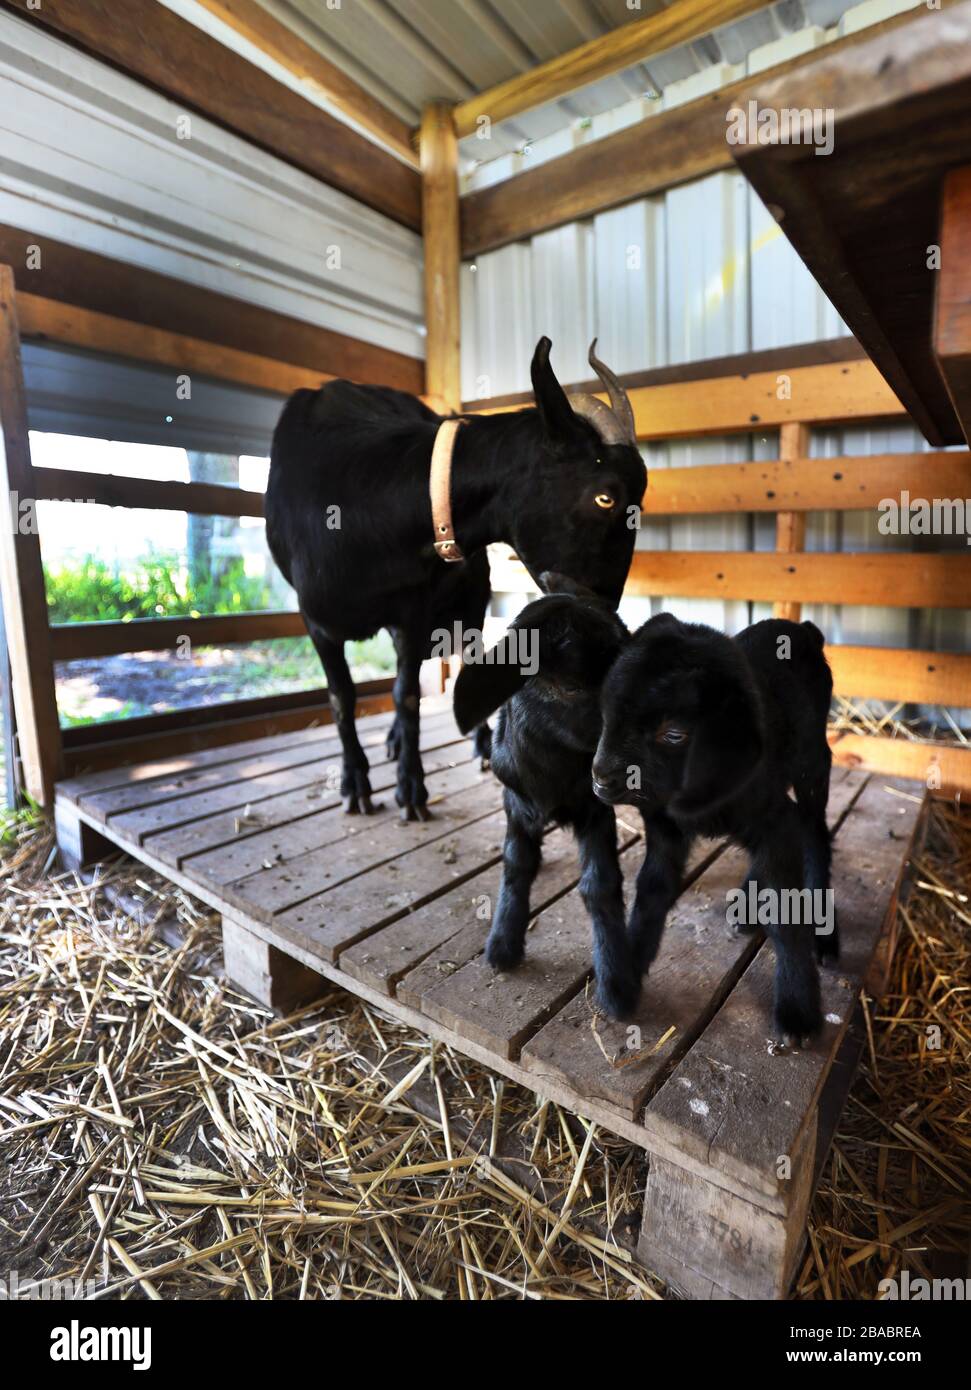 Farm animals: Baby goats on a local farm. Mother and newborn black goats  outdoors just a day old, on a urban farm in the neighborhood Stock Photo -  Alamy